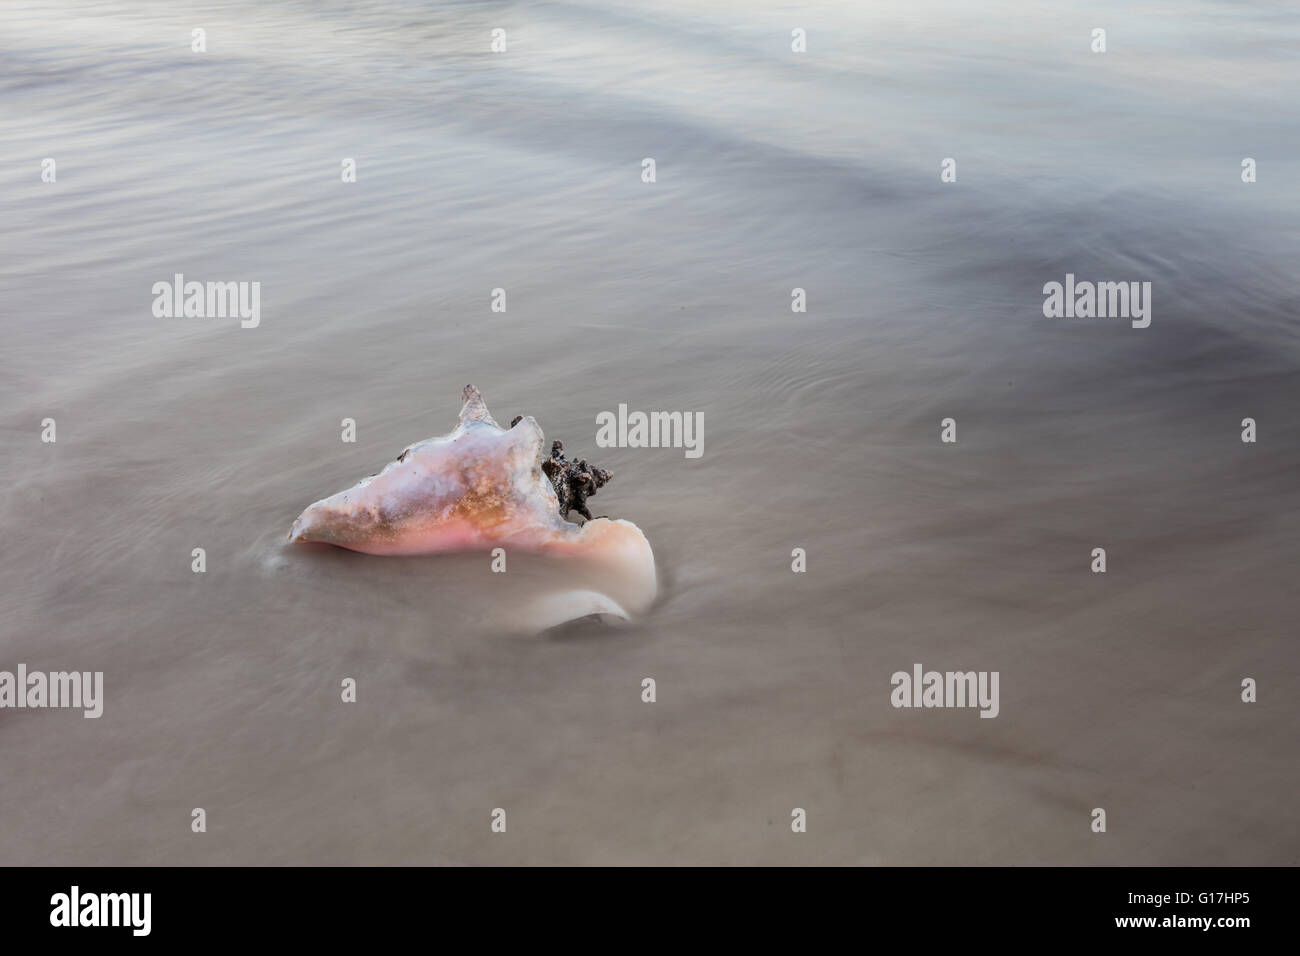 A Queen conch shell lies on a remote beach in the Caribbean Sea. This mollusk is used for food throughout the Caribbean. Stock Photo